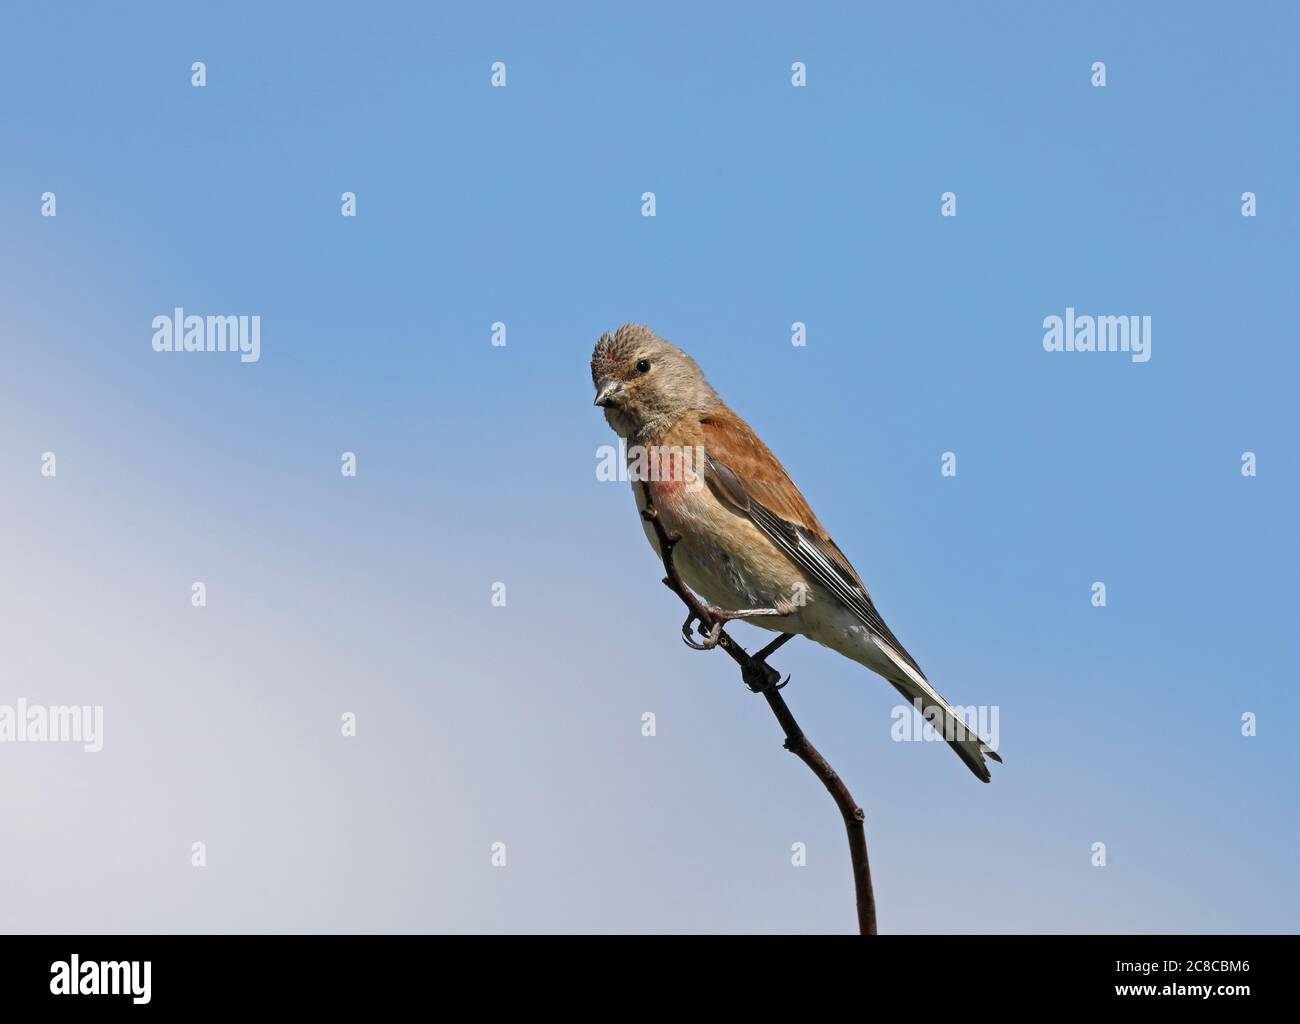 Common linnet, Linaria cannabina, sitting on twig, clean background Stock Photo